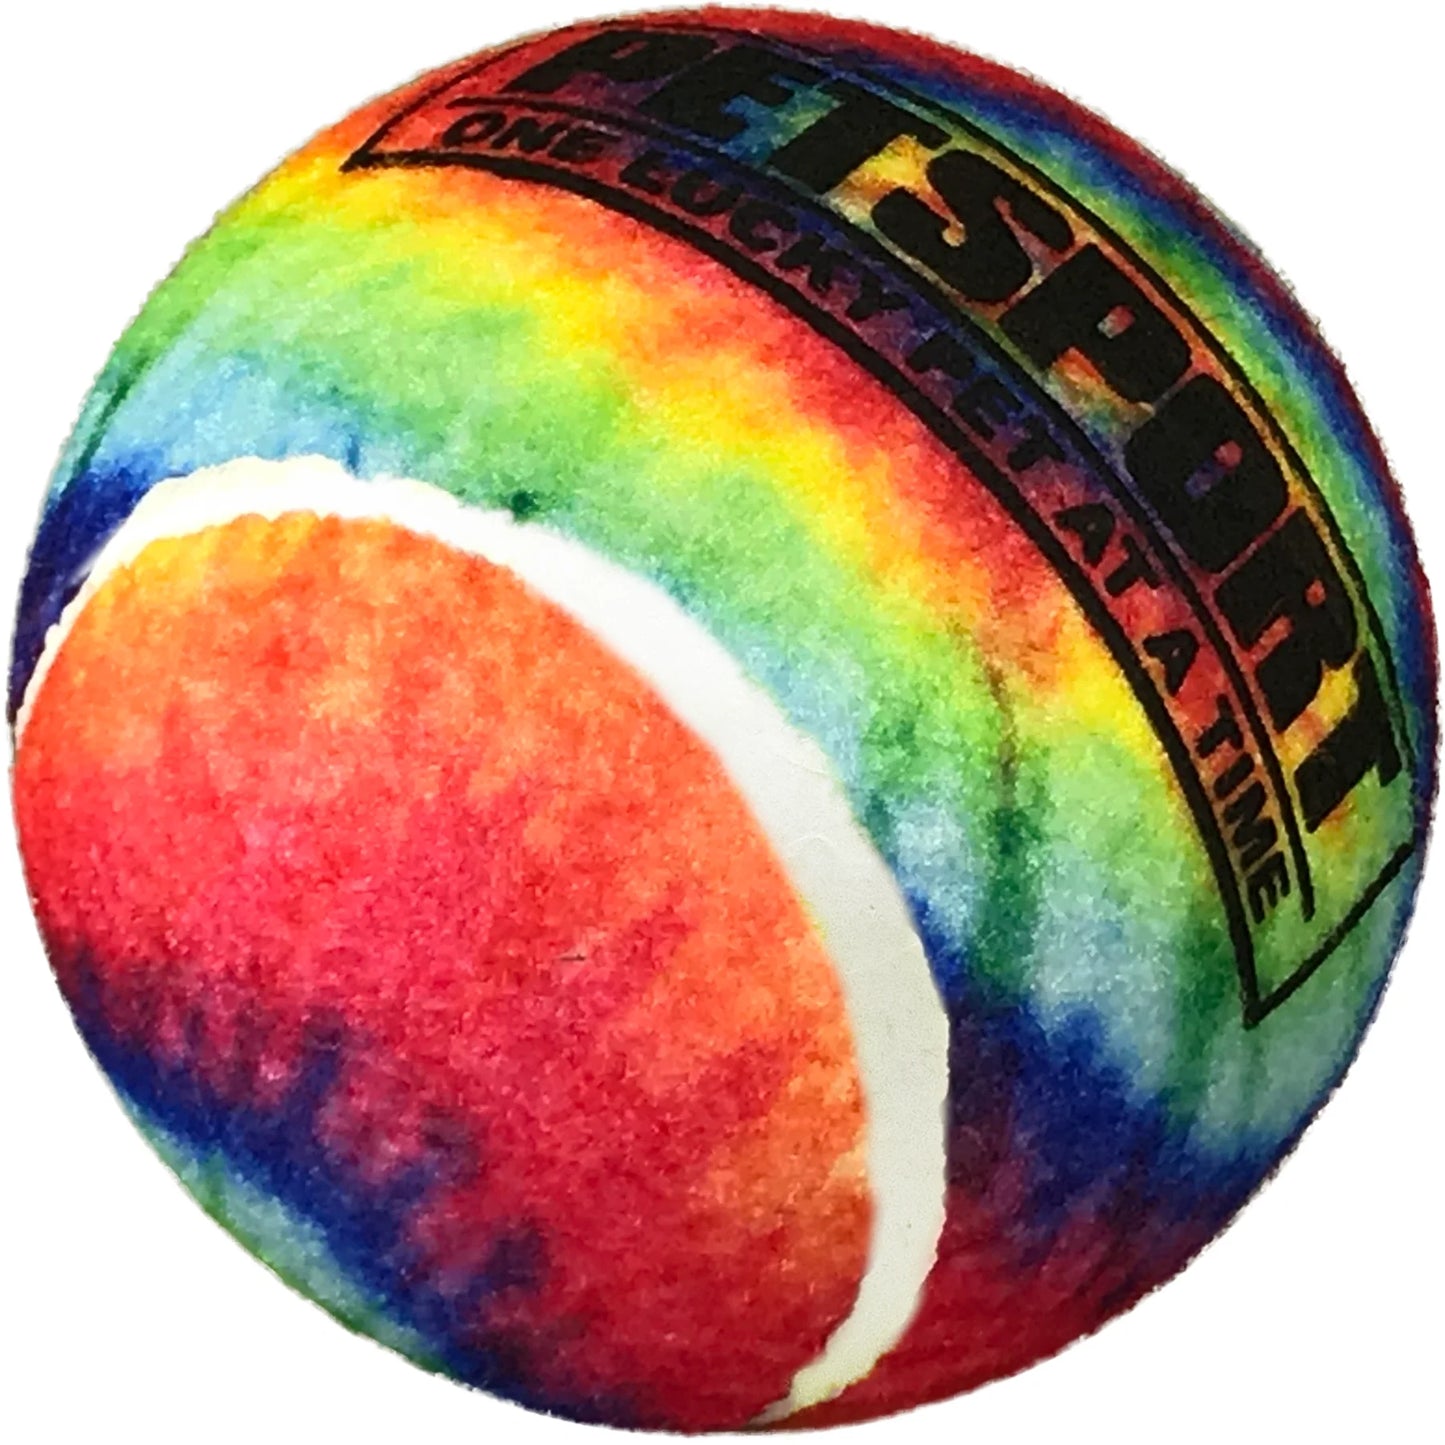 Petsport Tie Dye Squeaker Ball Toy For Dogs 10cm